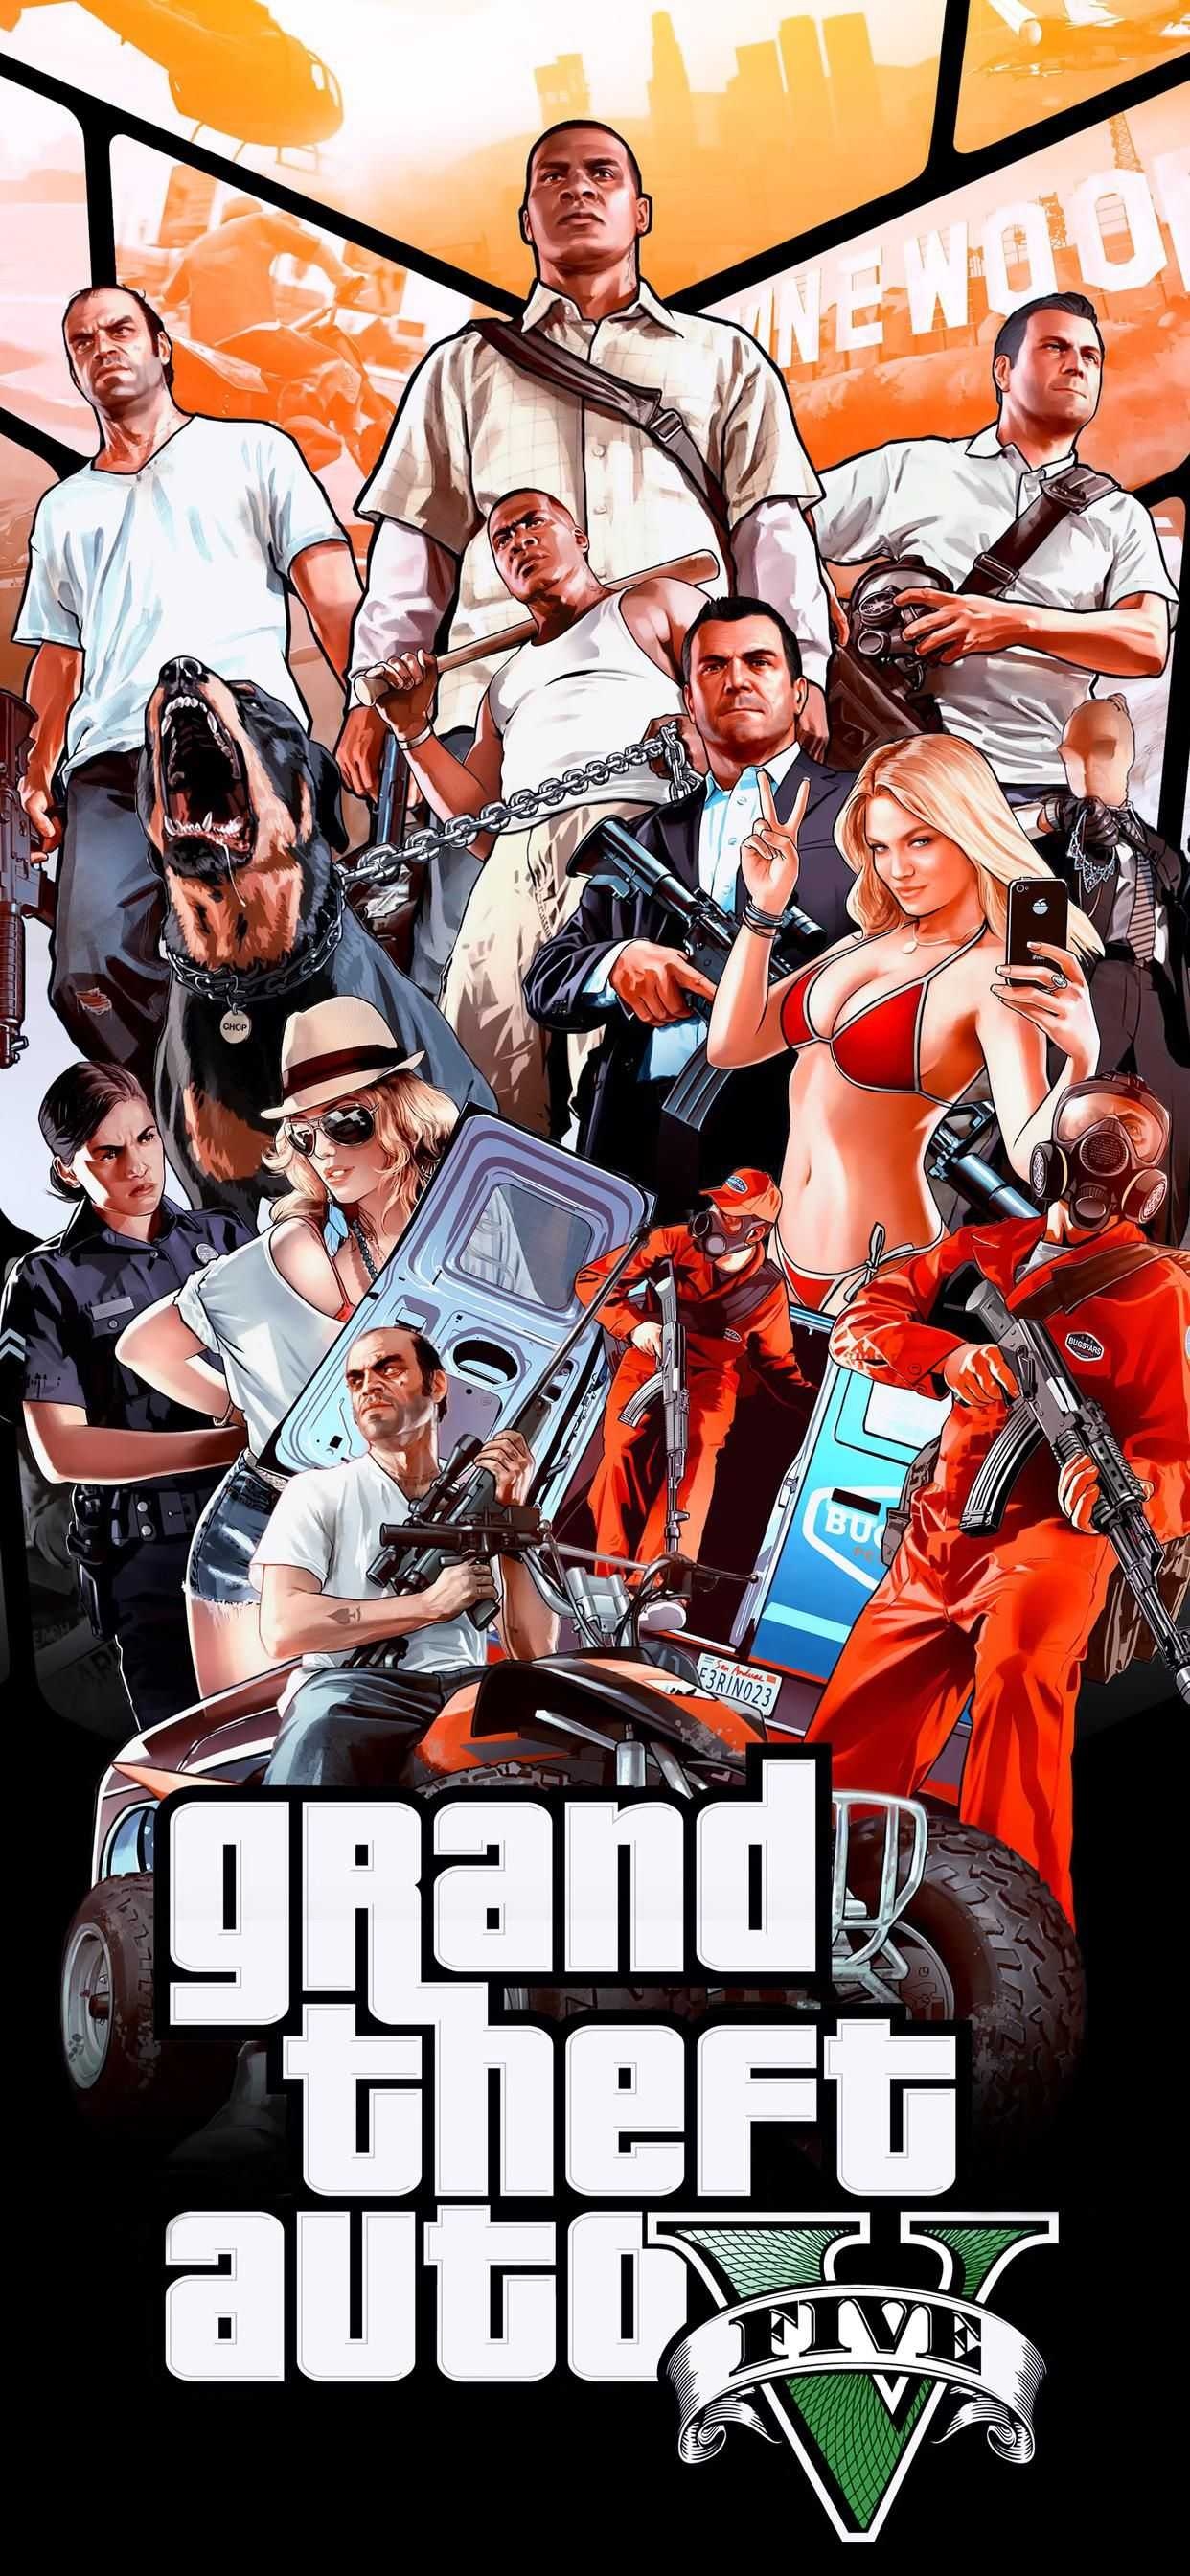 GTA V, Exciting wallpapers, Action-packed gameplay, Thrilling adventures, 1250x2690 HD Handy